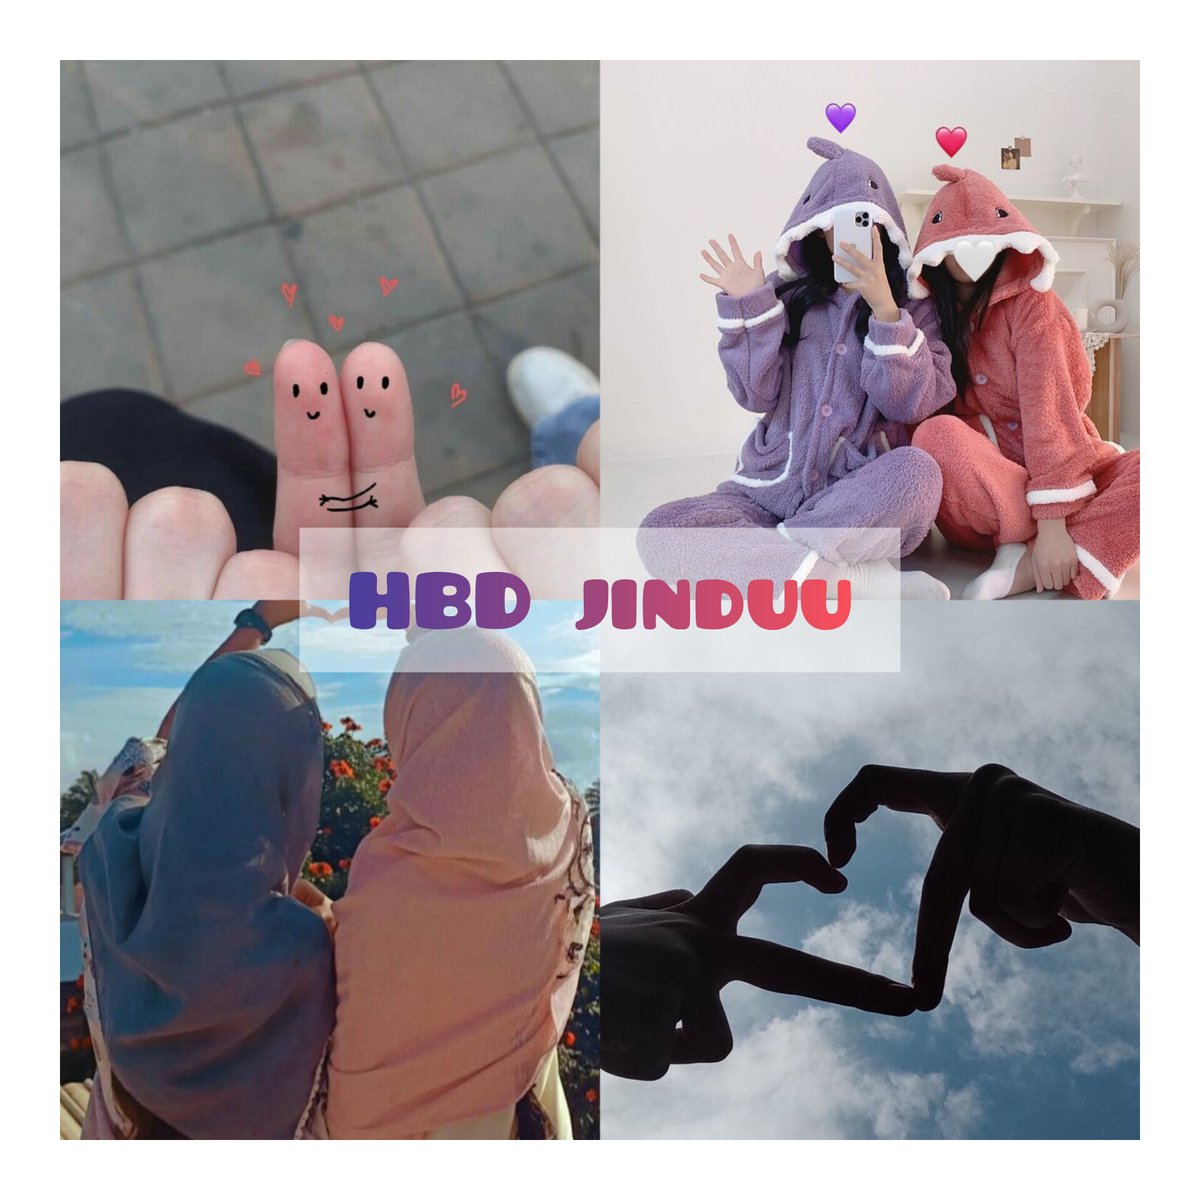 'Happy Birthday Month  jinduuuu🎂🎉 May You celebrate Your all Days with fun adventures, laughter, and making unforgettable memories Cheers to another year of amazing moments! 🥳

#Mahi_Ka_Eppy_Birthday
#21March